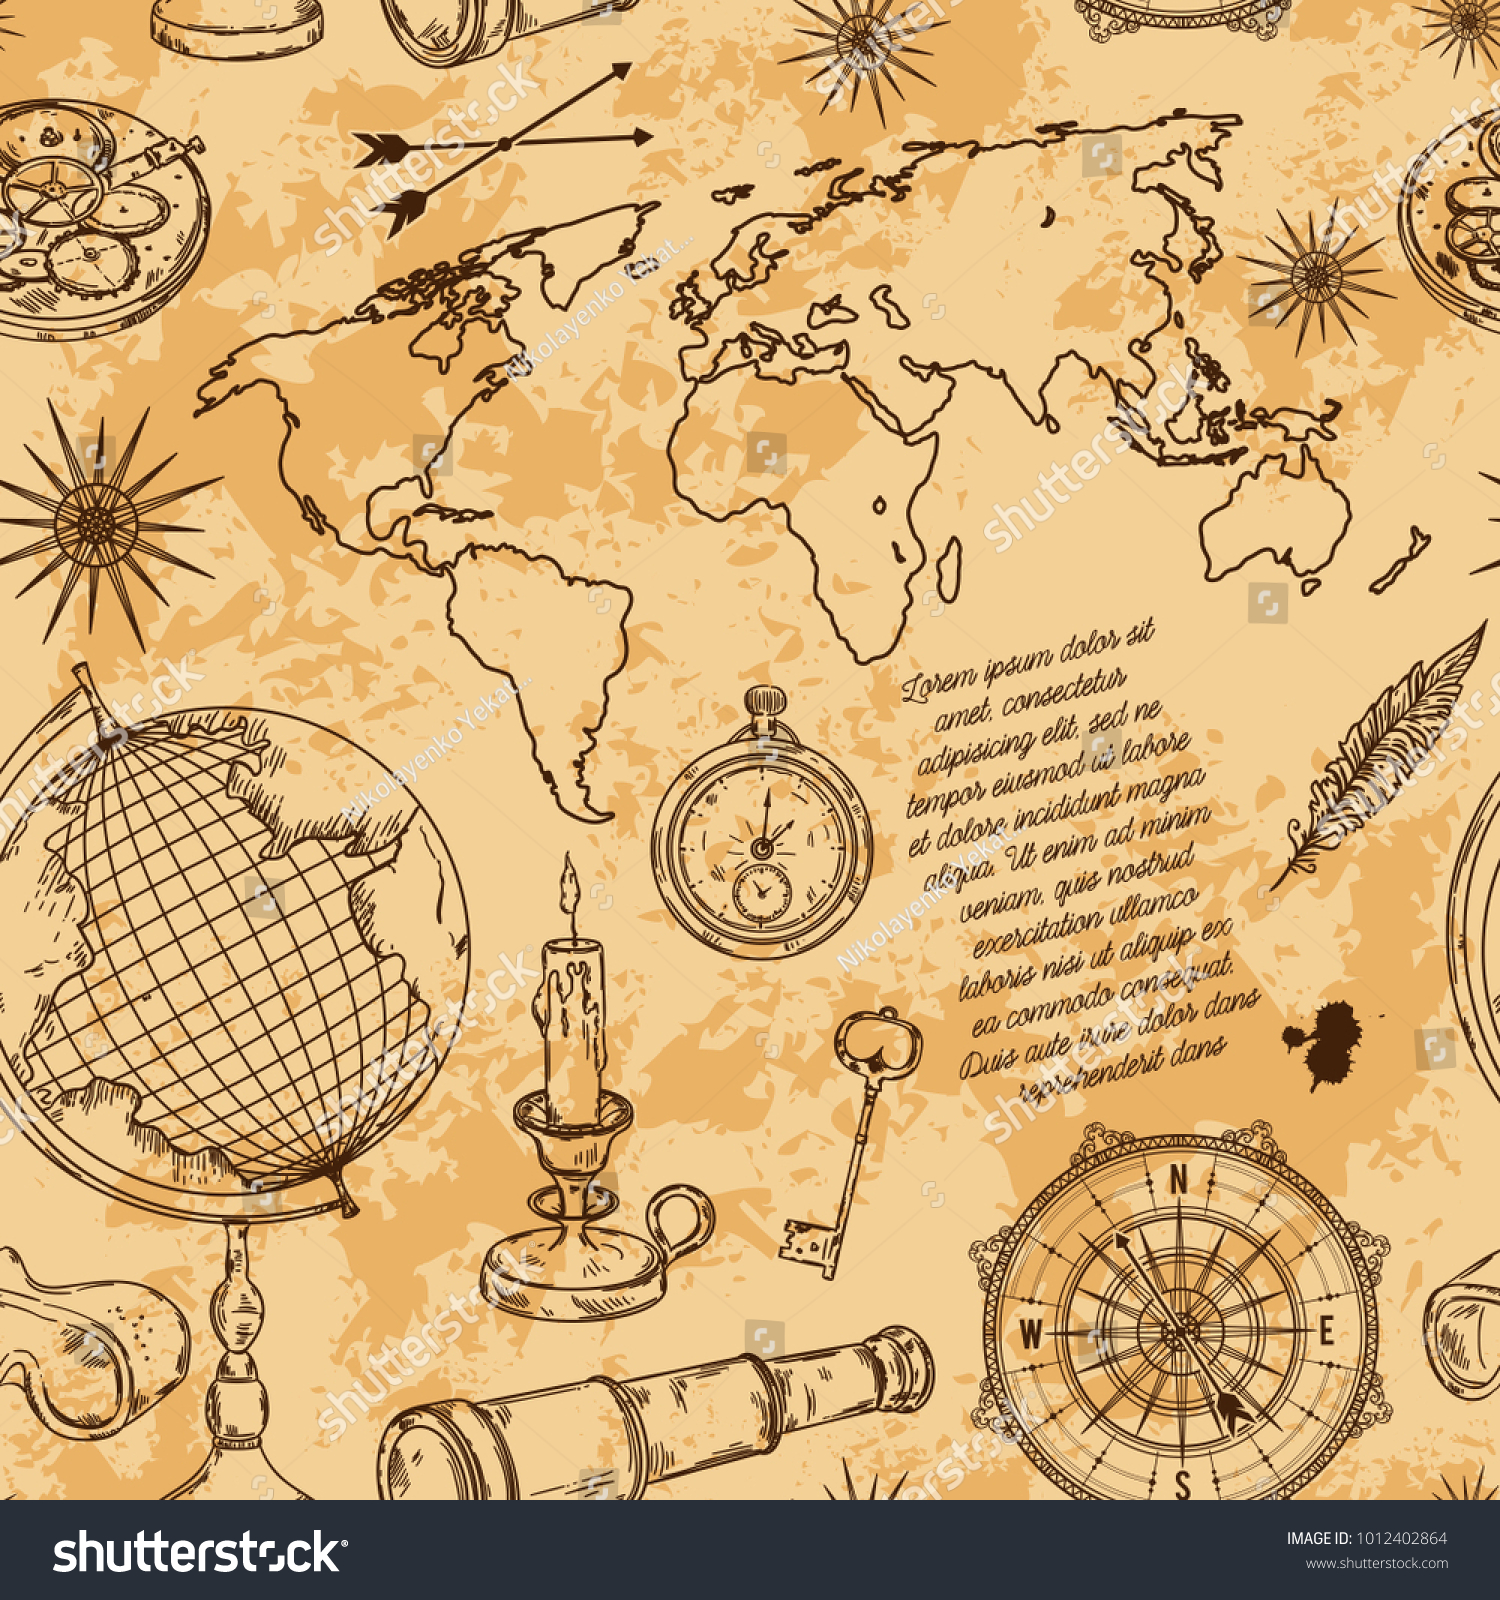 Seamless pattern with globe, compass, world map and wind rose. Vintage science objects set in steampunk style. Vector illustration #1012402864